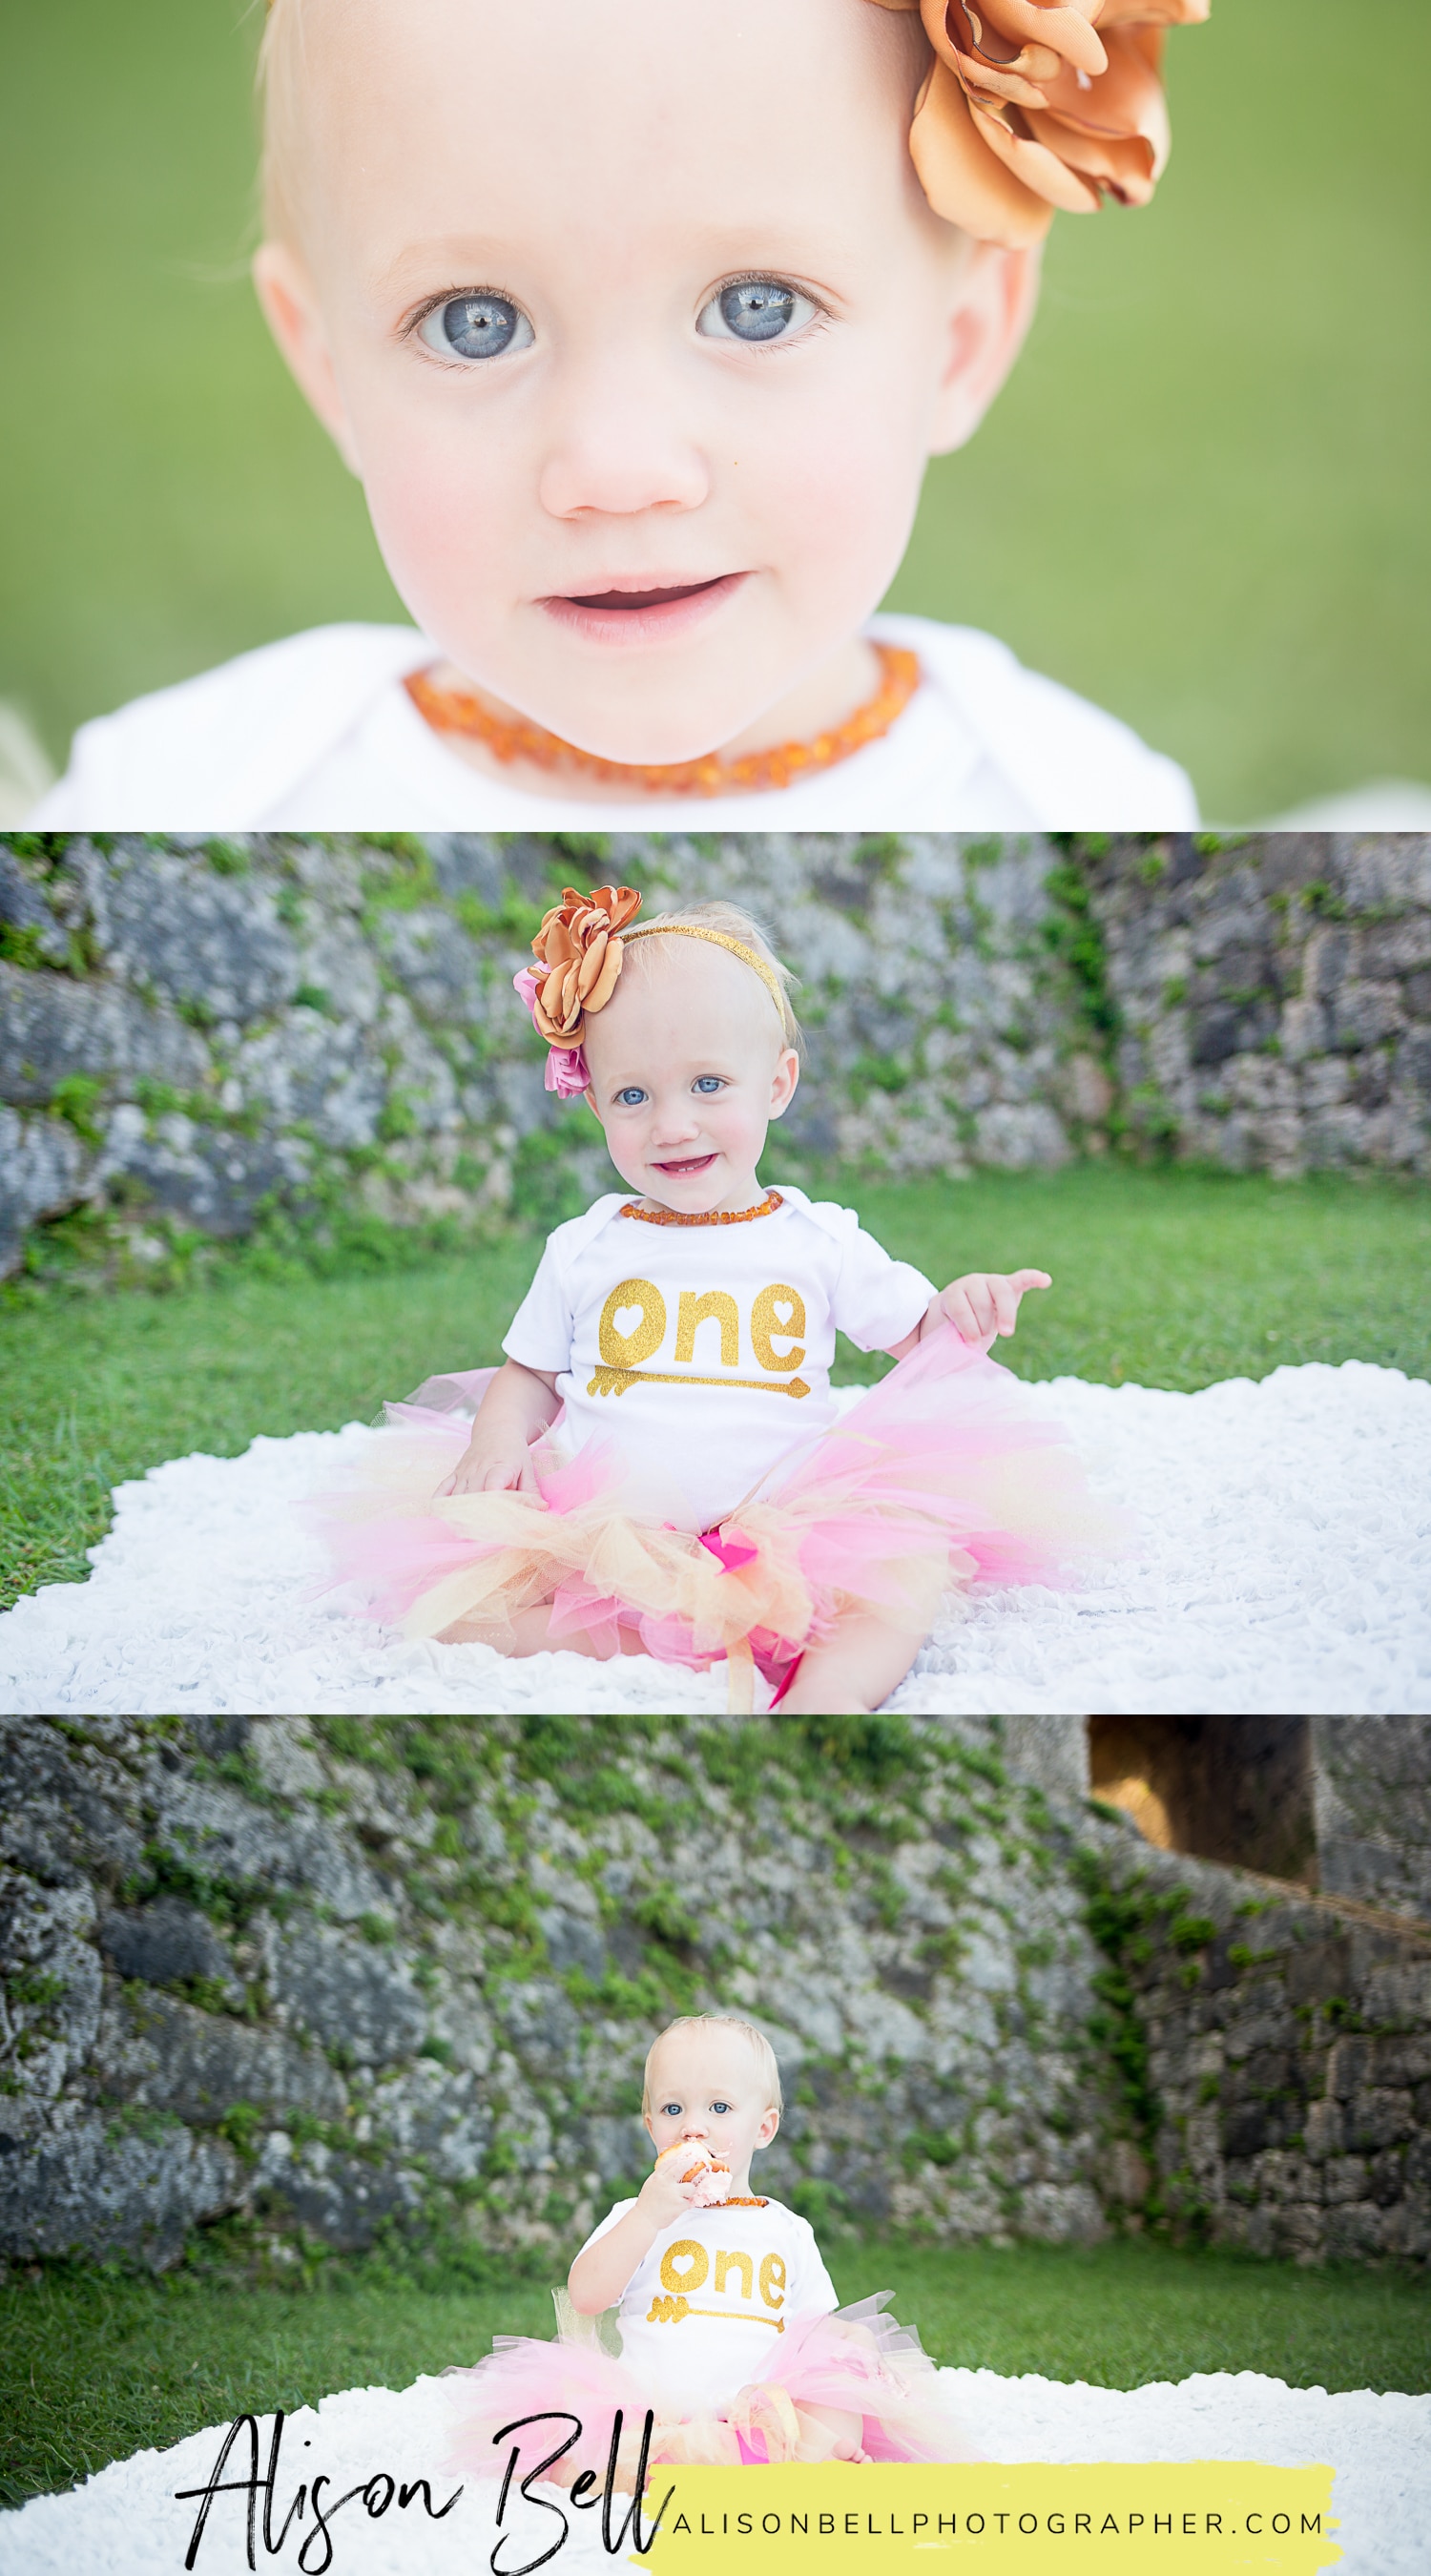 One year birthday photo session and cake smash with a cupcake in Okinawa Japan at Zakimi Castle by Alison Bell, Photographer #alisonbellphotog alisonbellphotographer.com